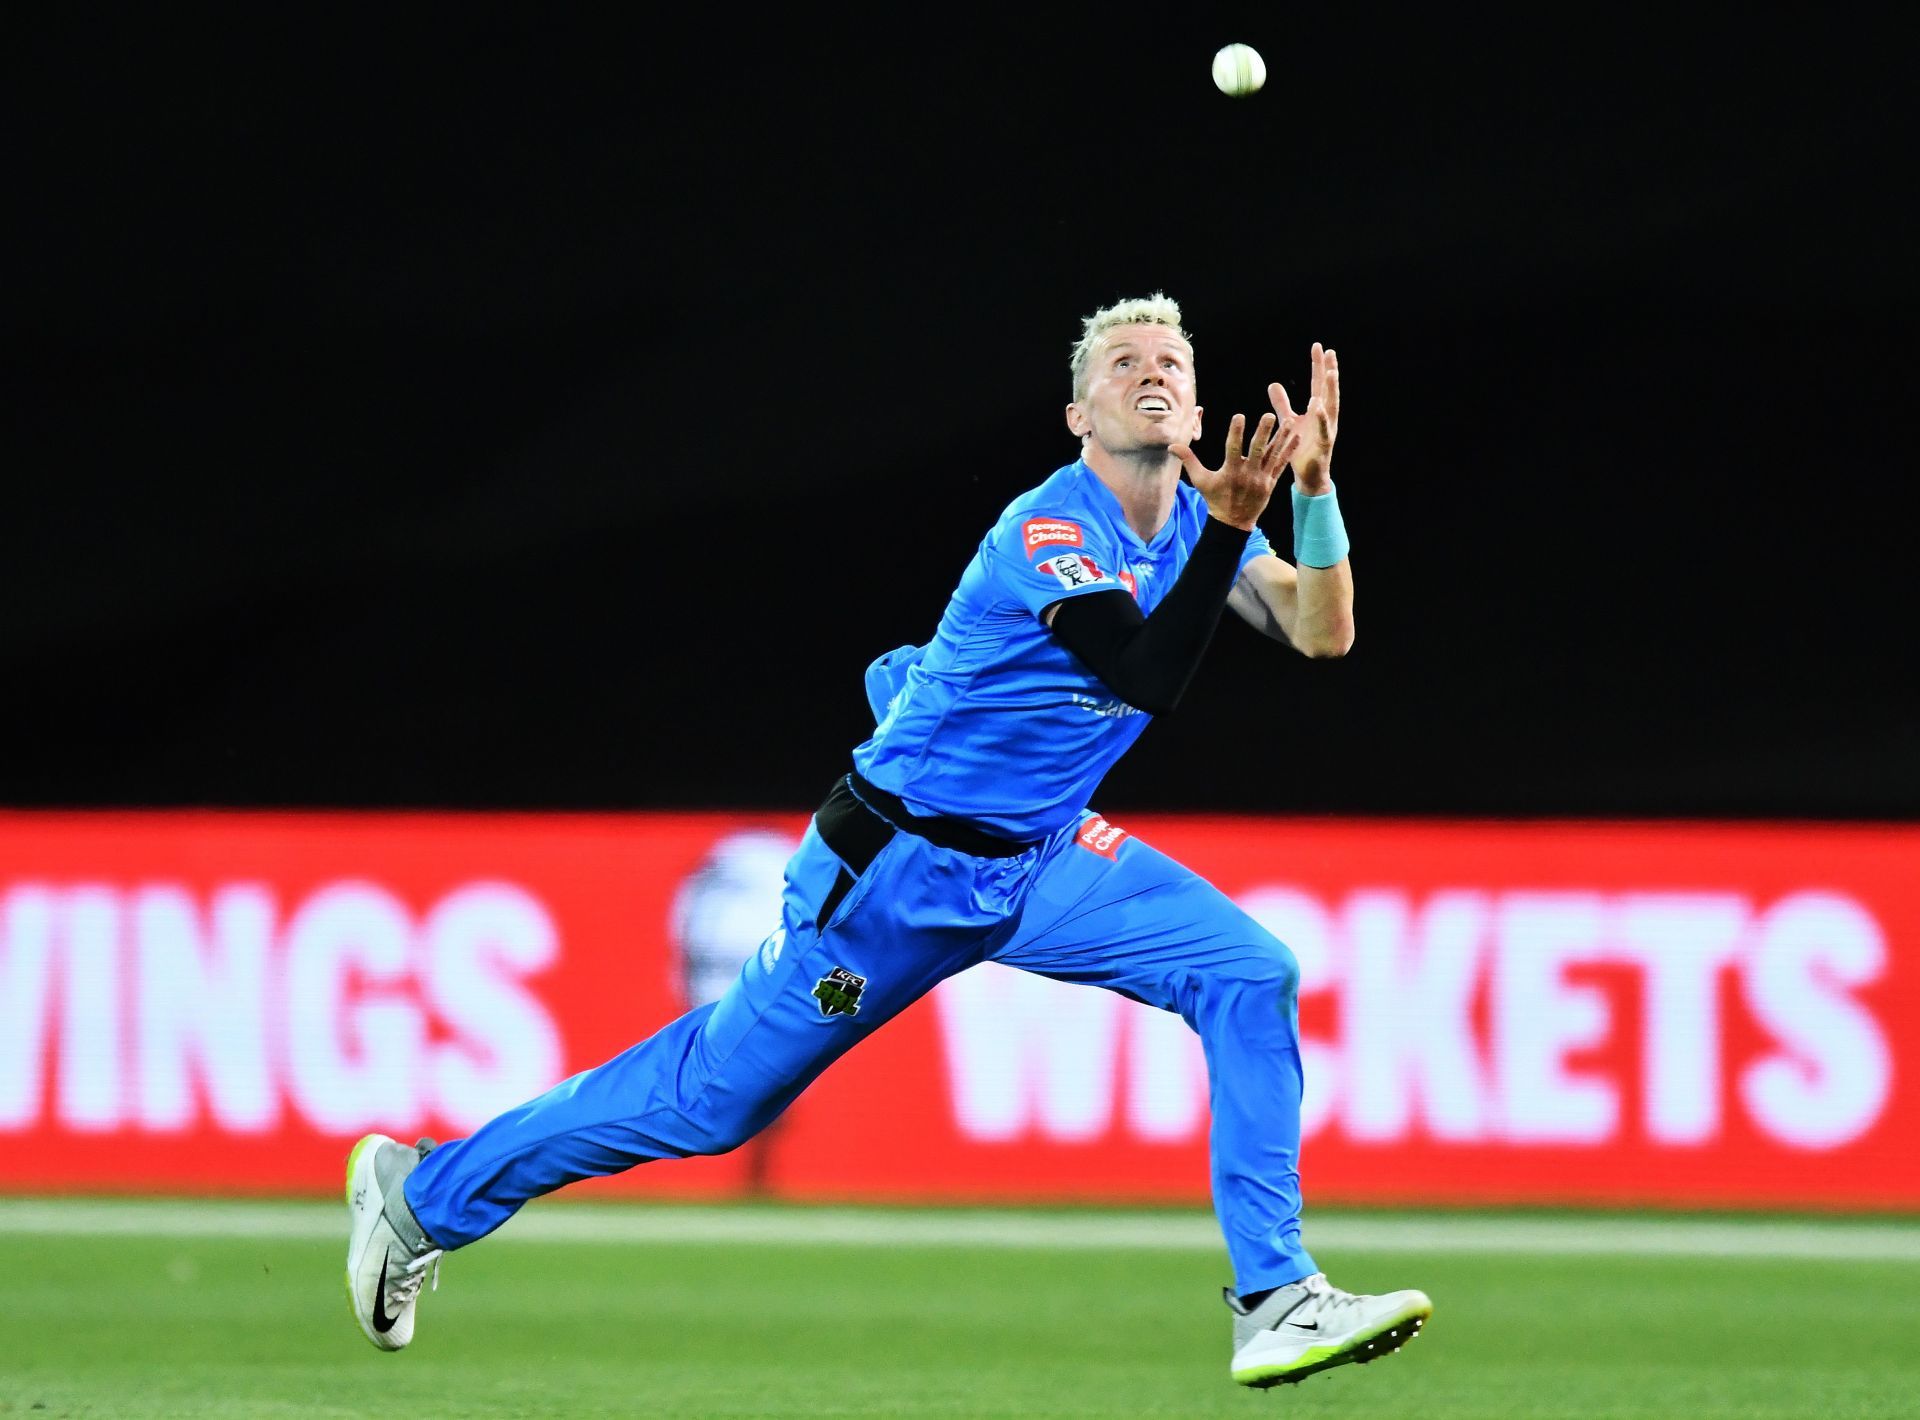 Peter Siddle bagged a three-fer against the Renegades and will be looking to repeat the feat.